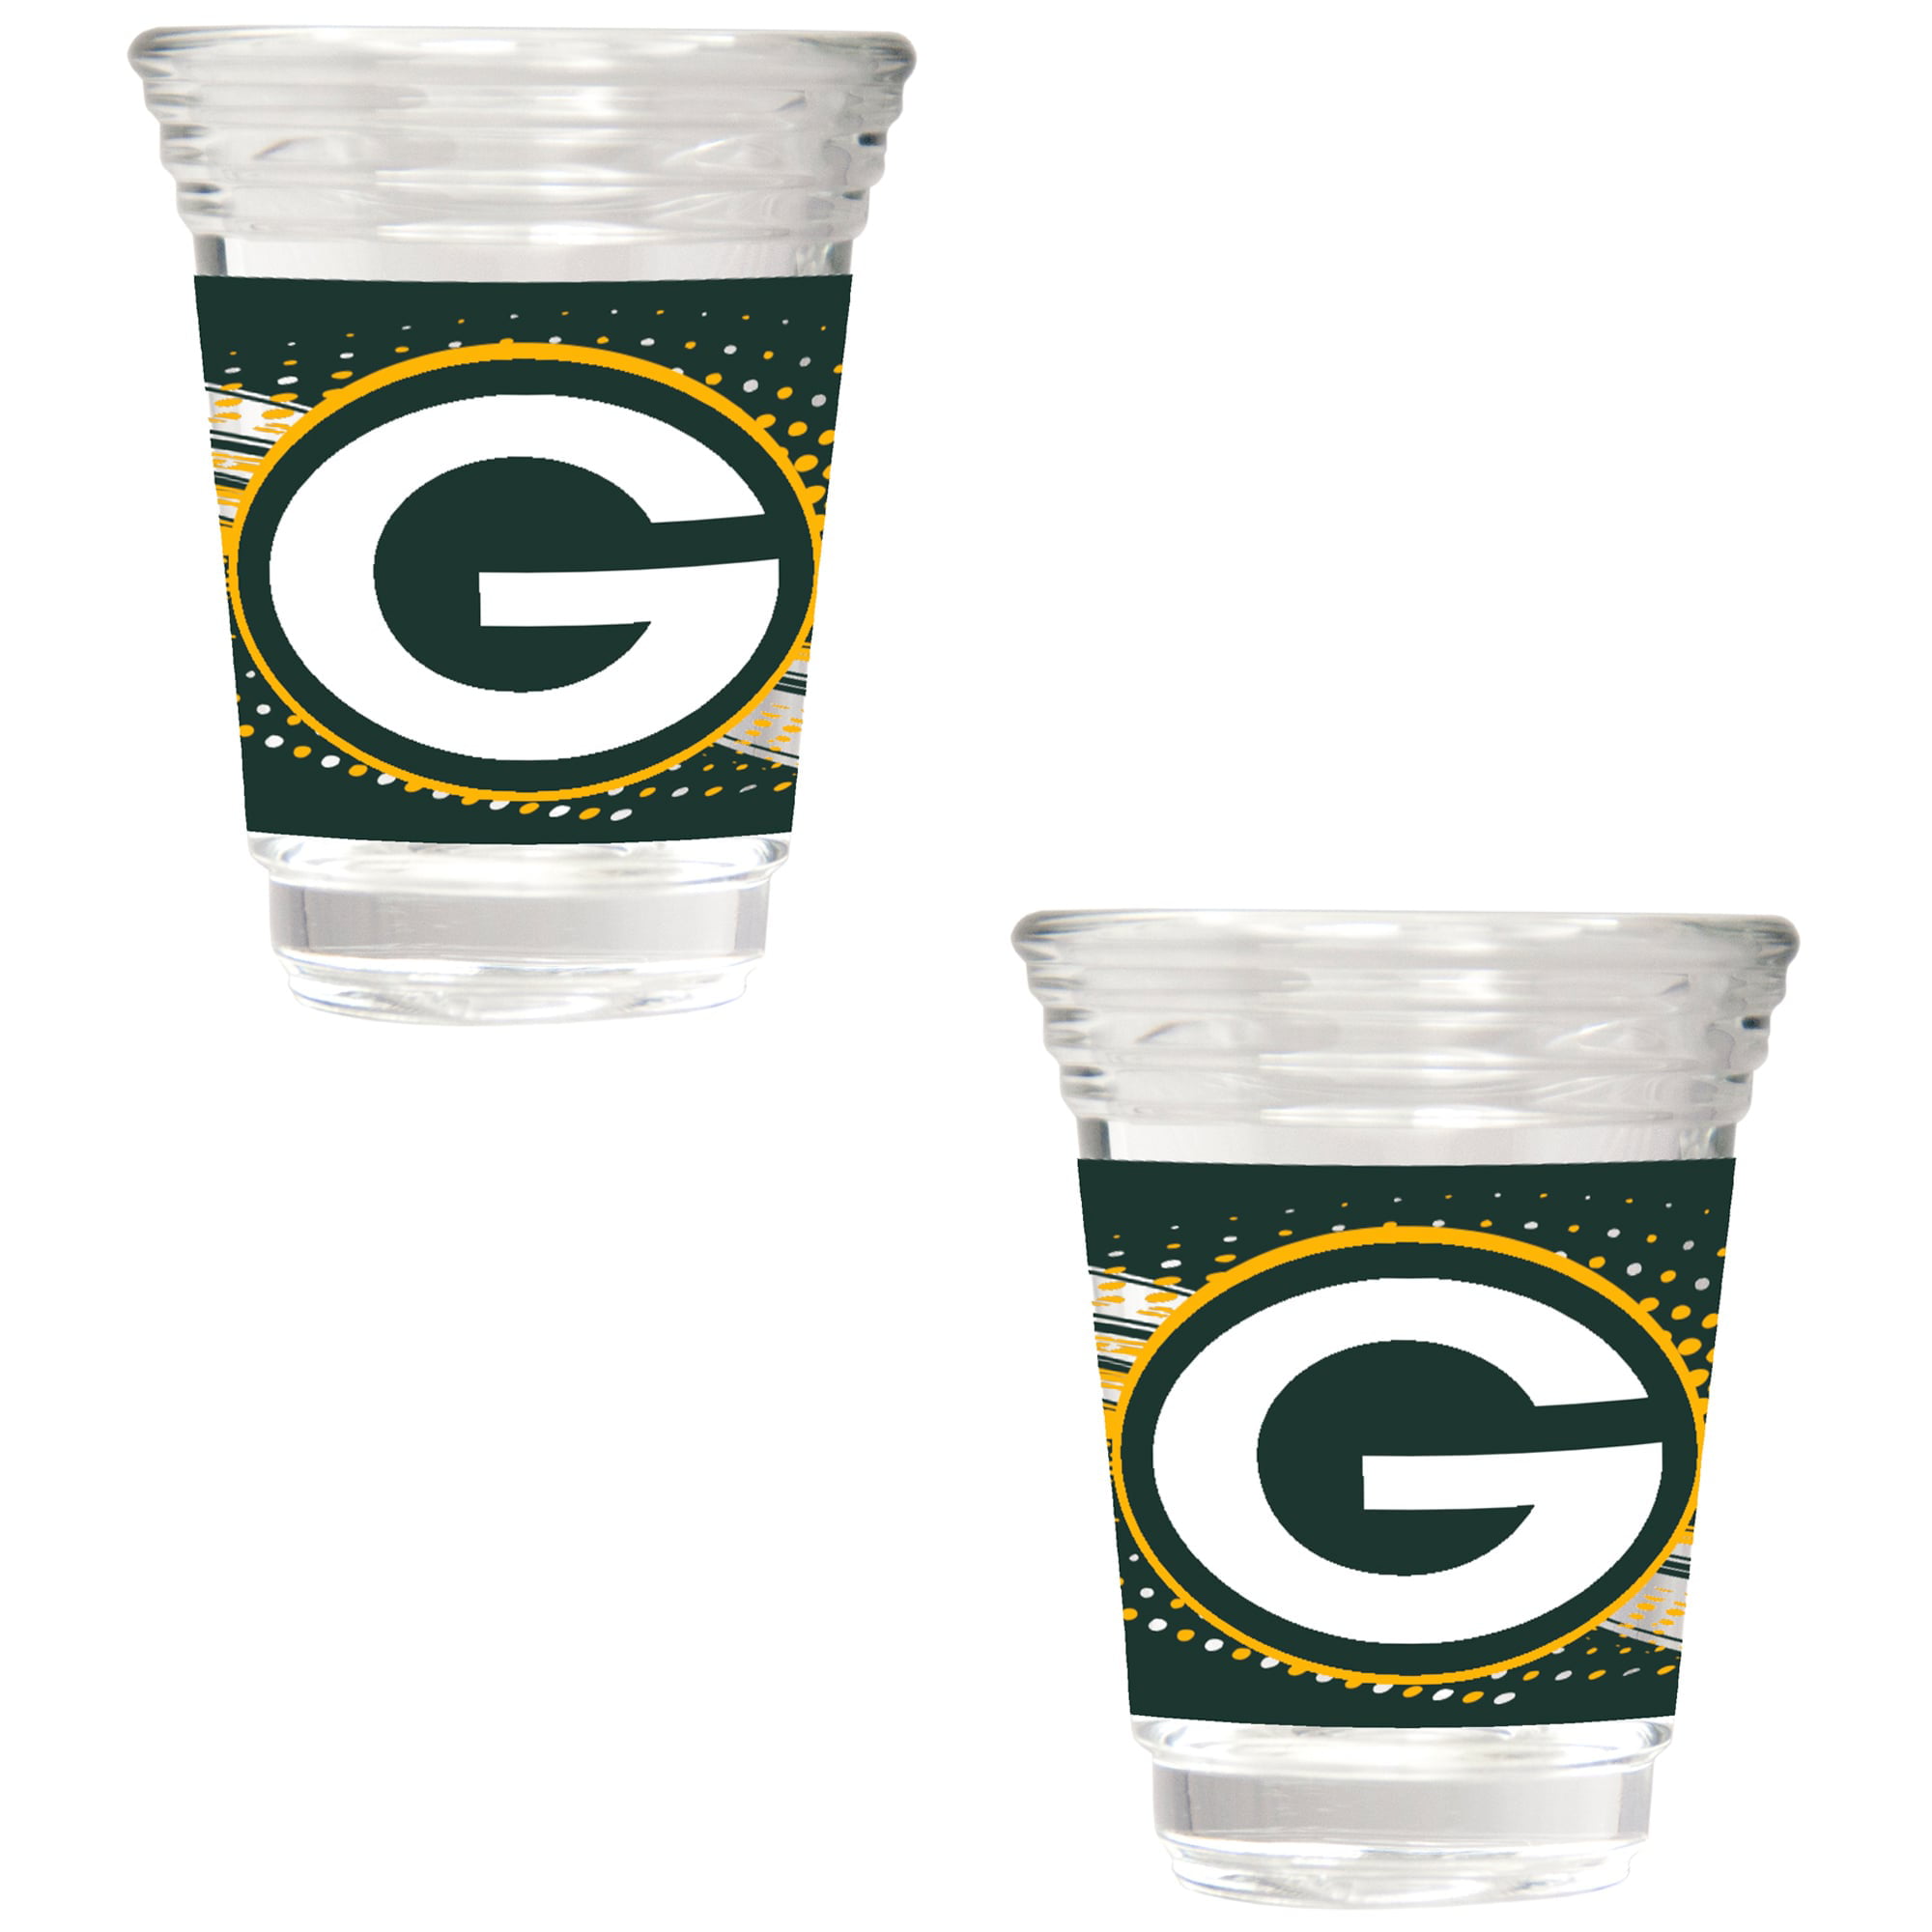 Green Bay Packers 2Piece 2oz. Party Shot Glass Set